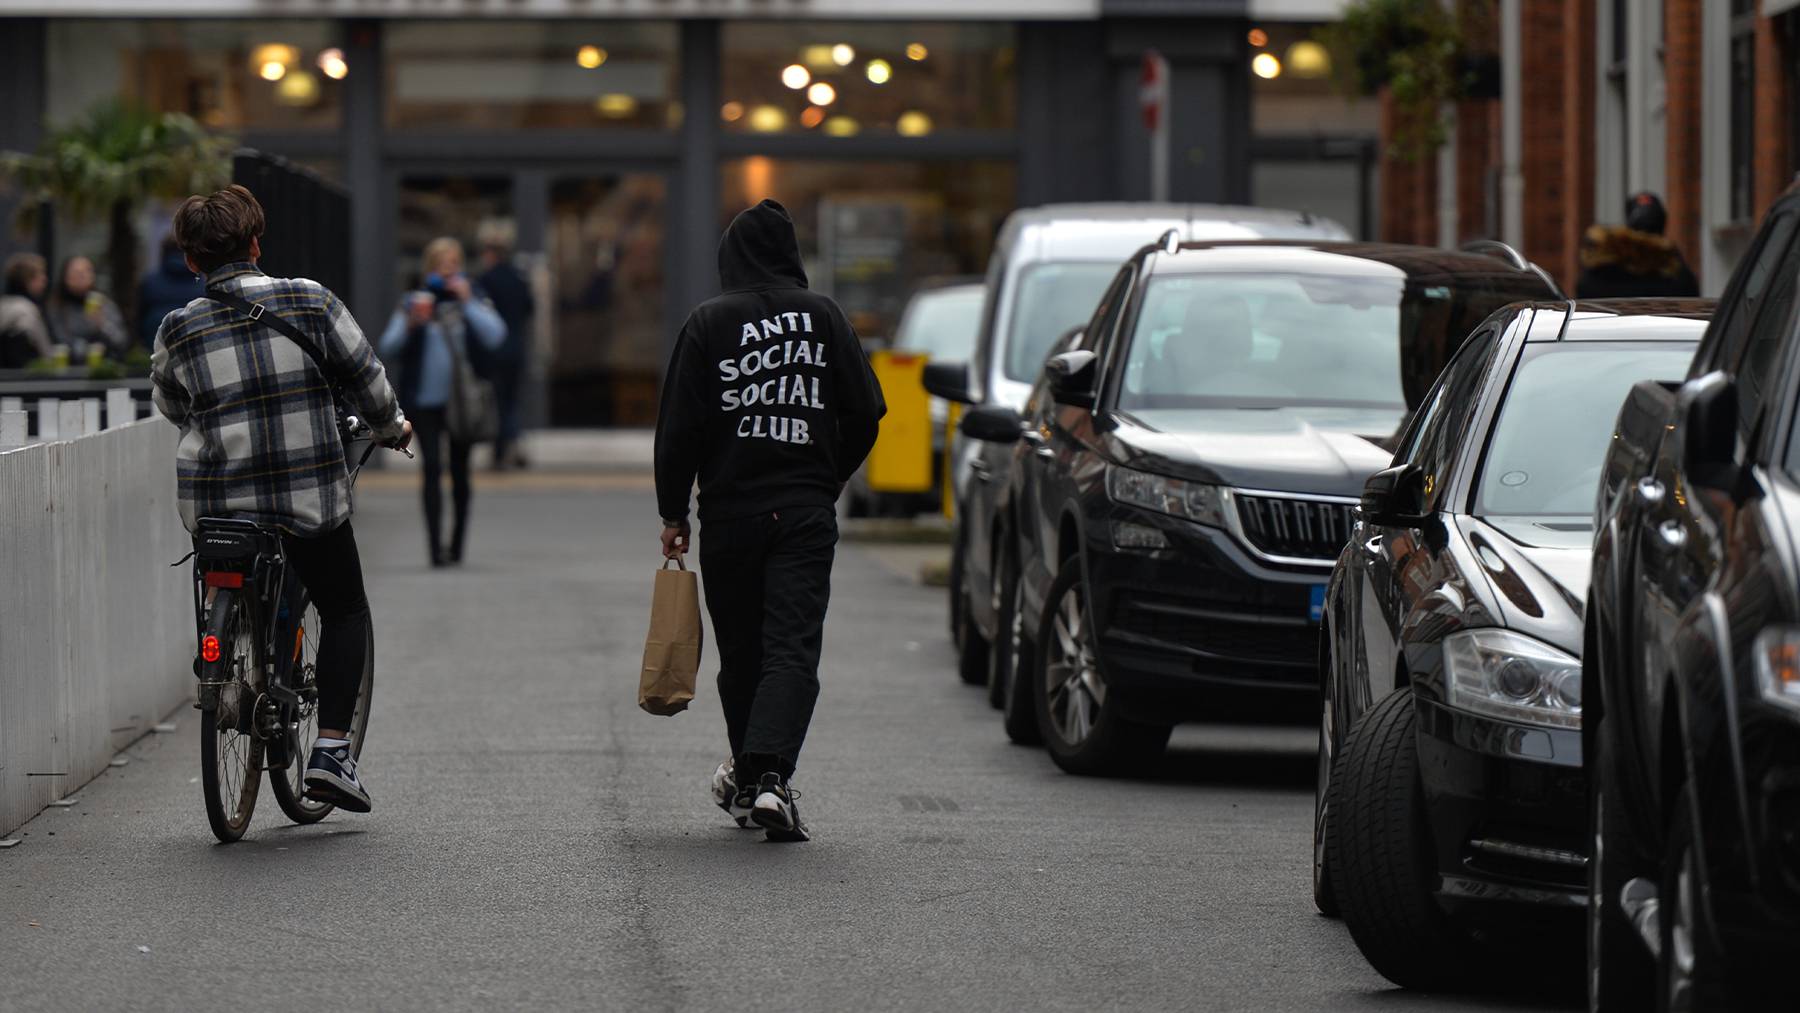 Streetwear label Anti Social Social Club was purchased by licensing and brand management firm Marquee Brands for an undisclosed sum.